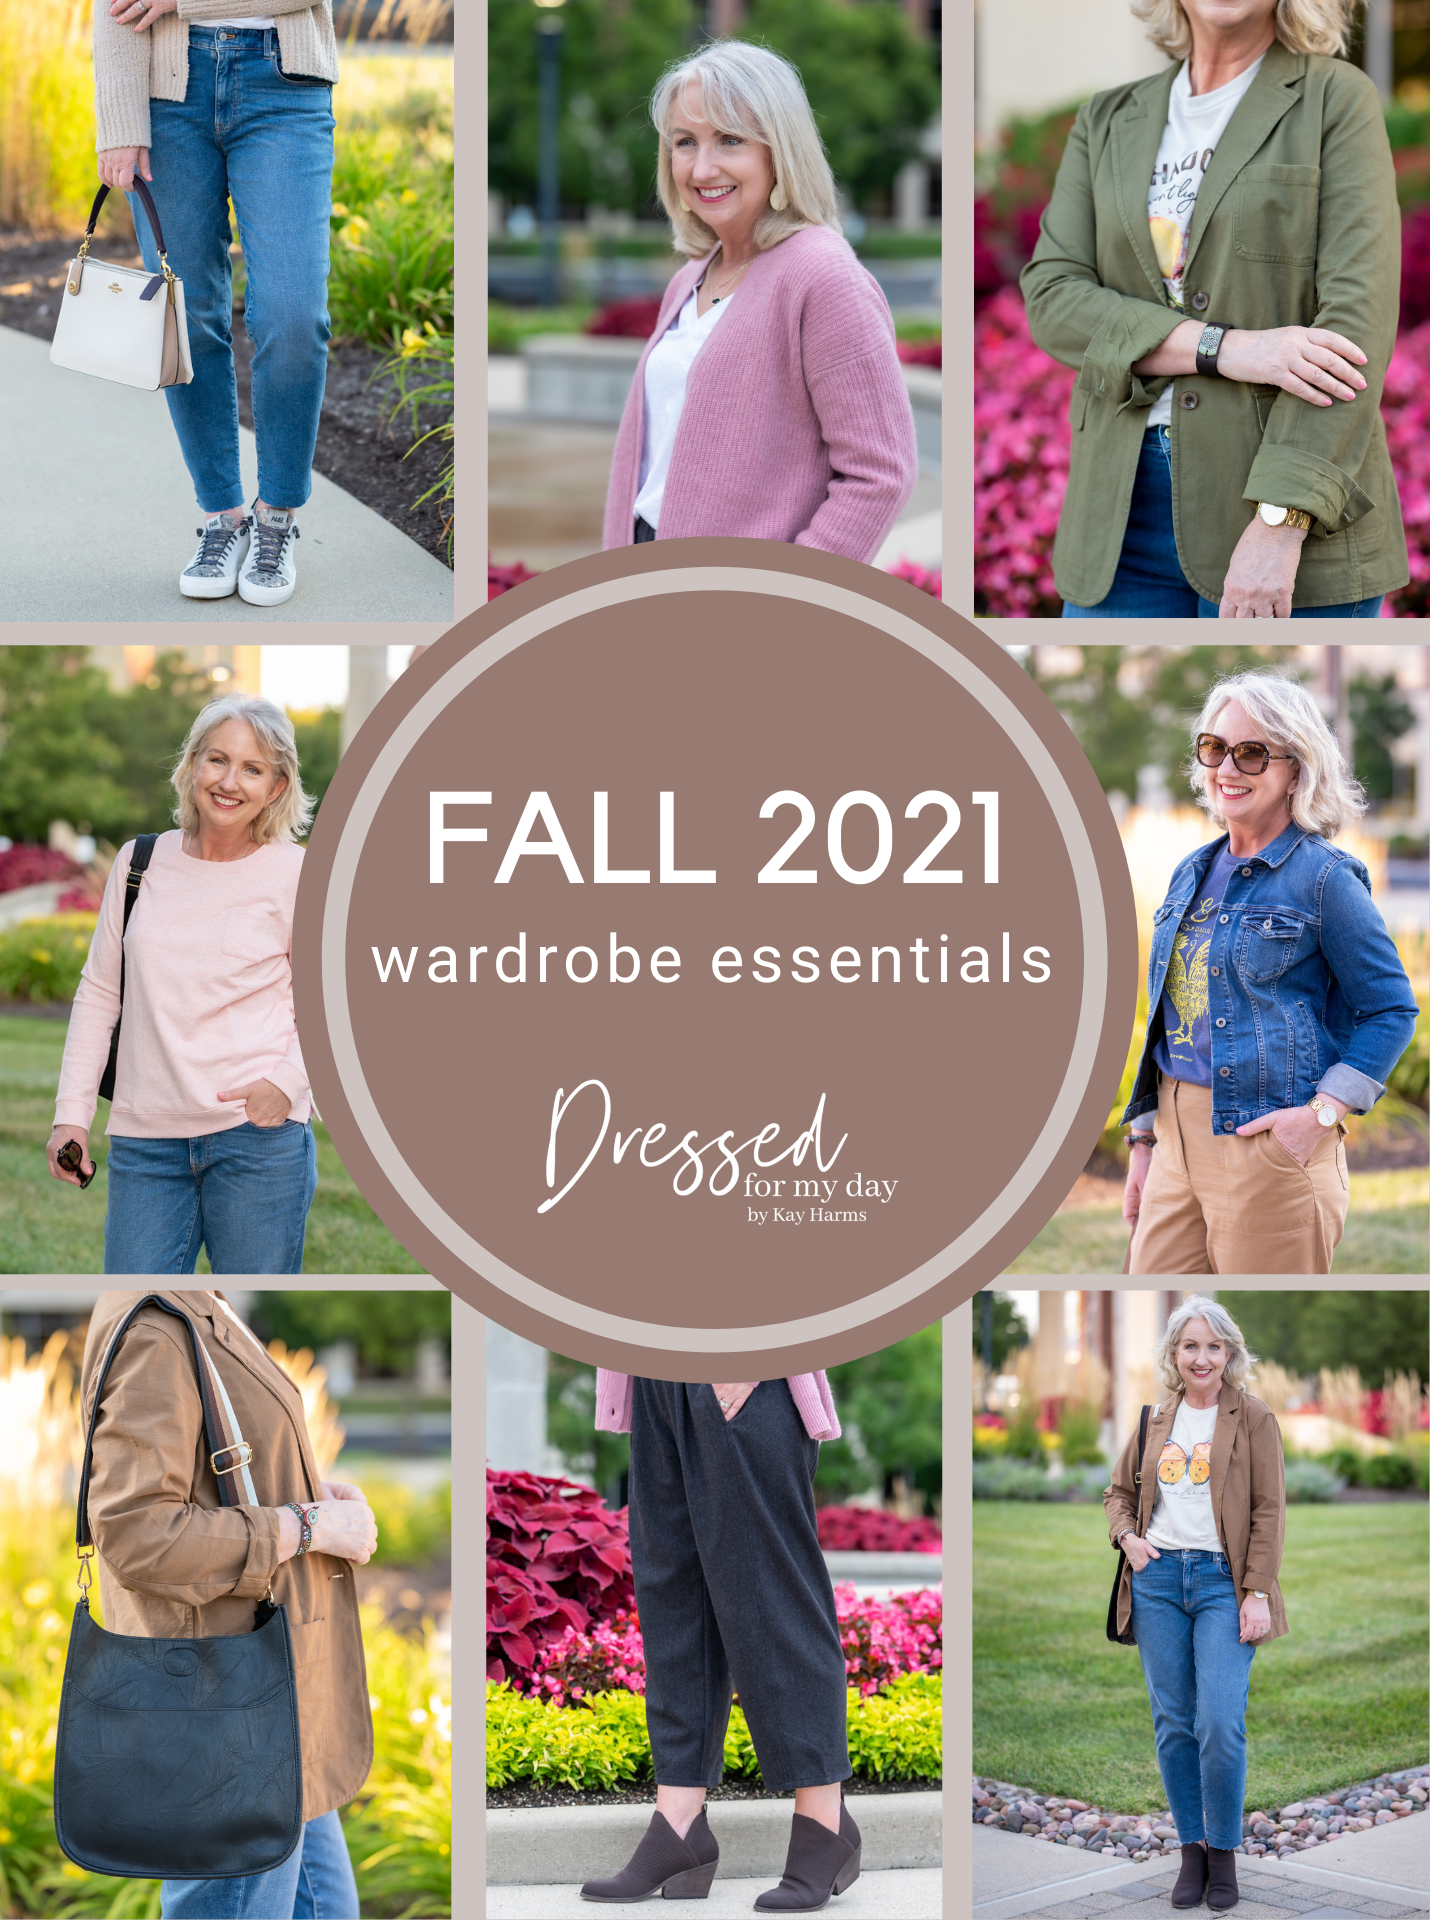 7 Trend-Forward Basics Every Woman Needs in 2021